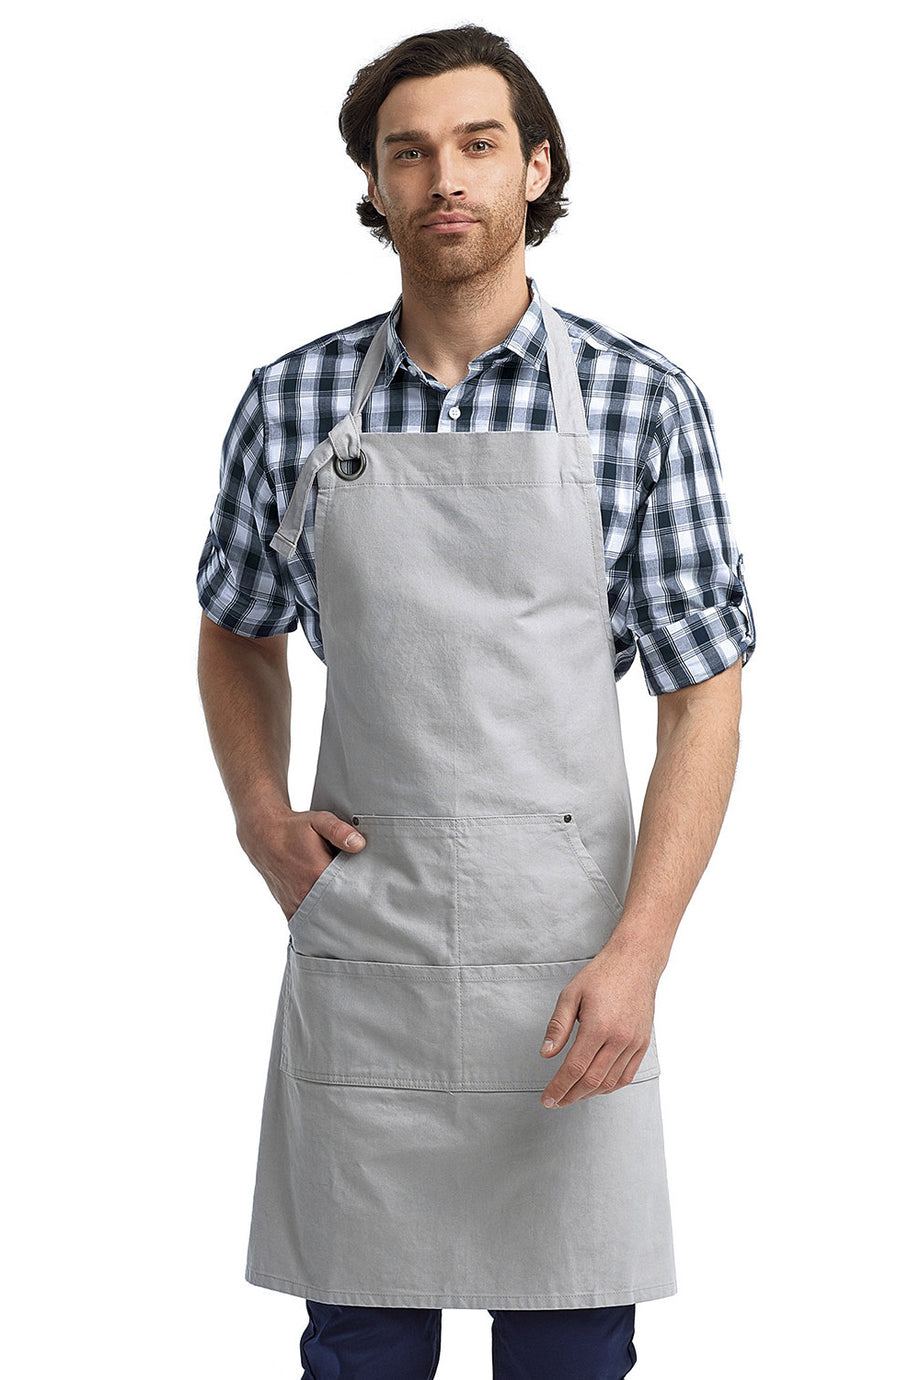 Artisan Collection by Reprime Silver Bib Adjustable Apron (4 Pocket Pouch)